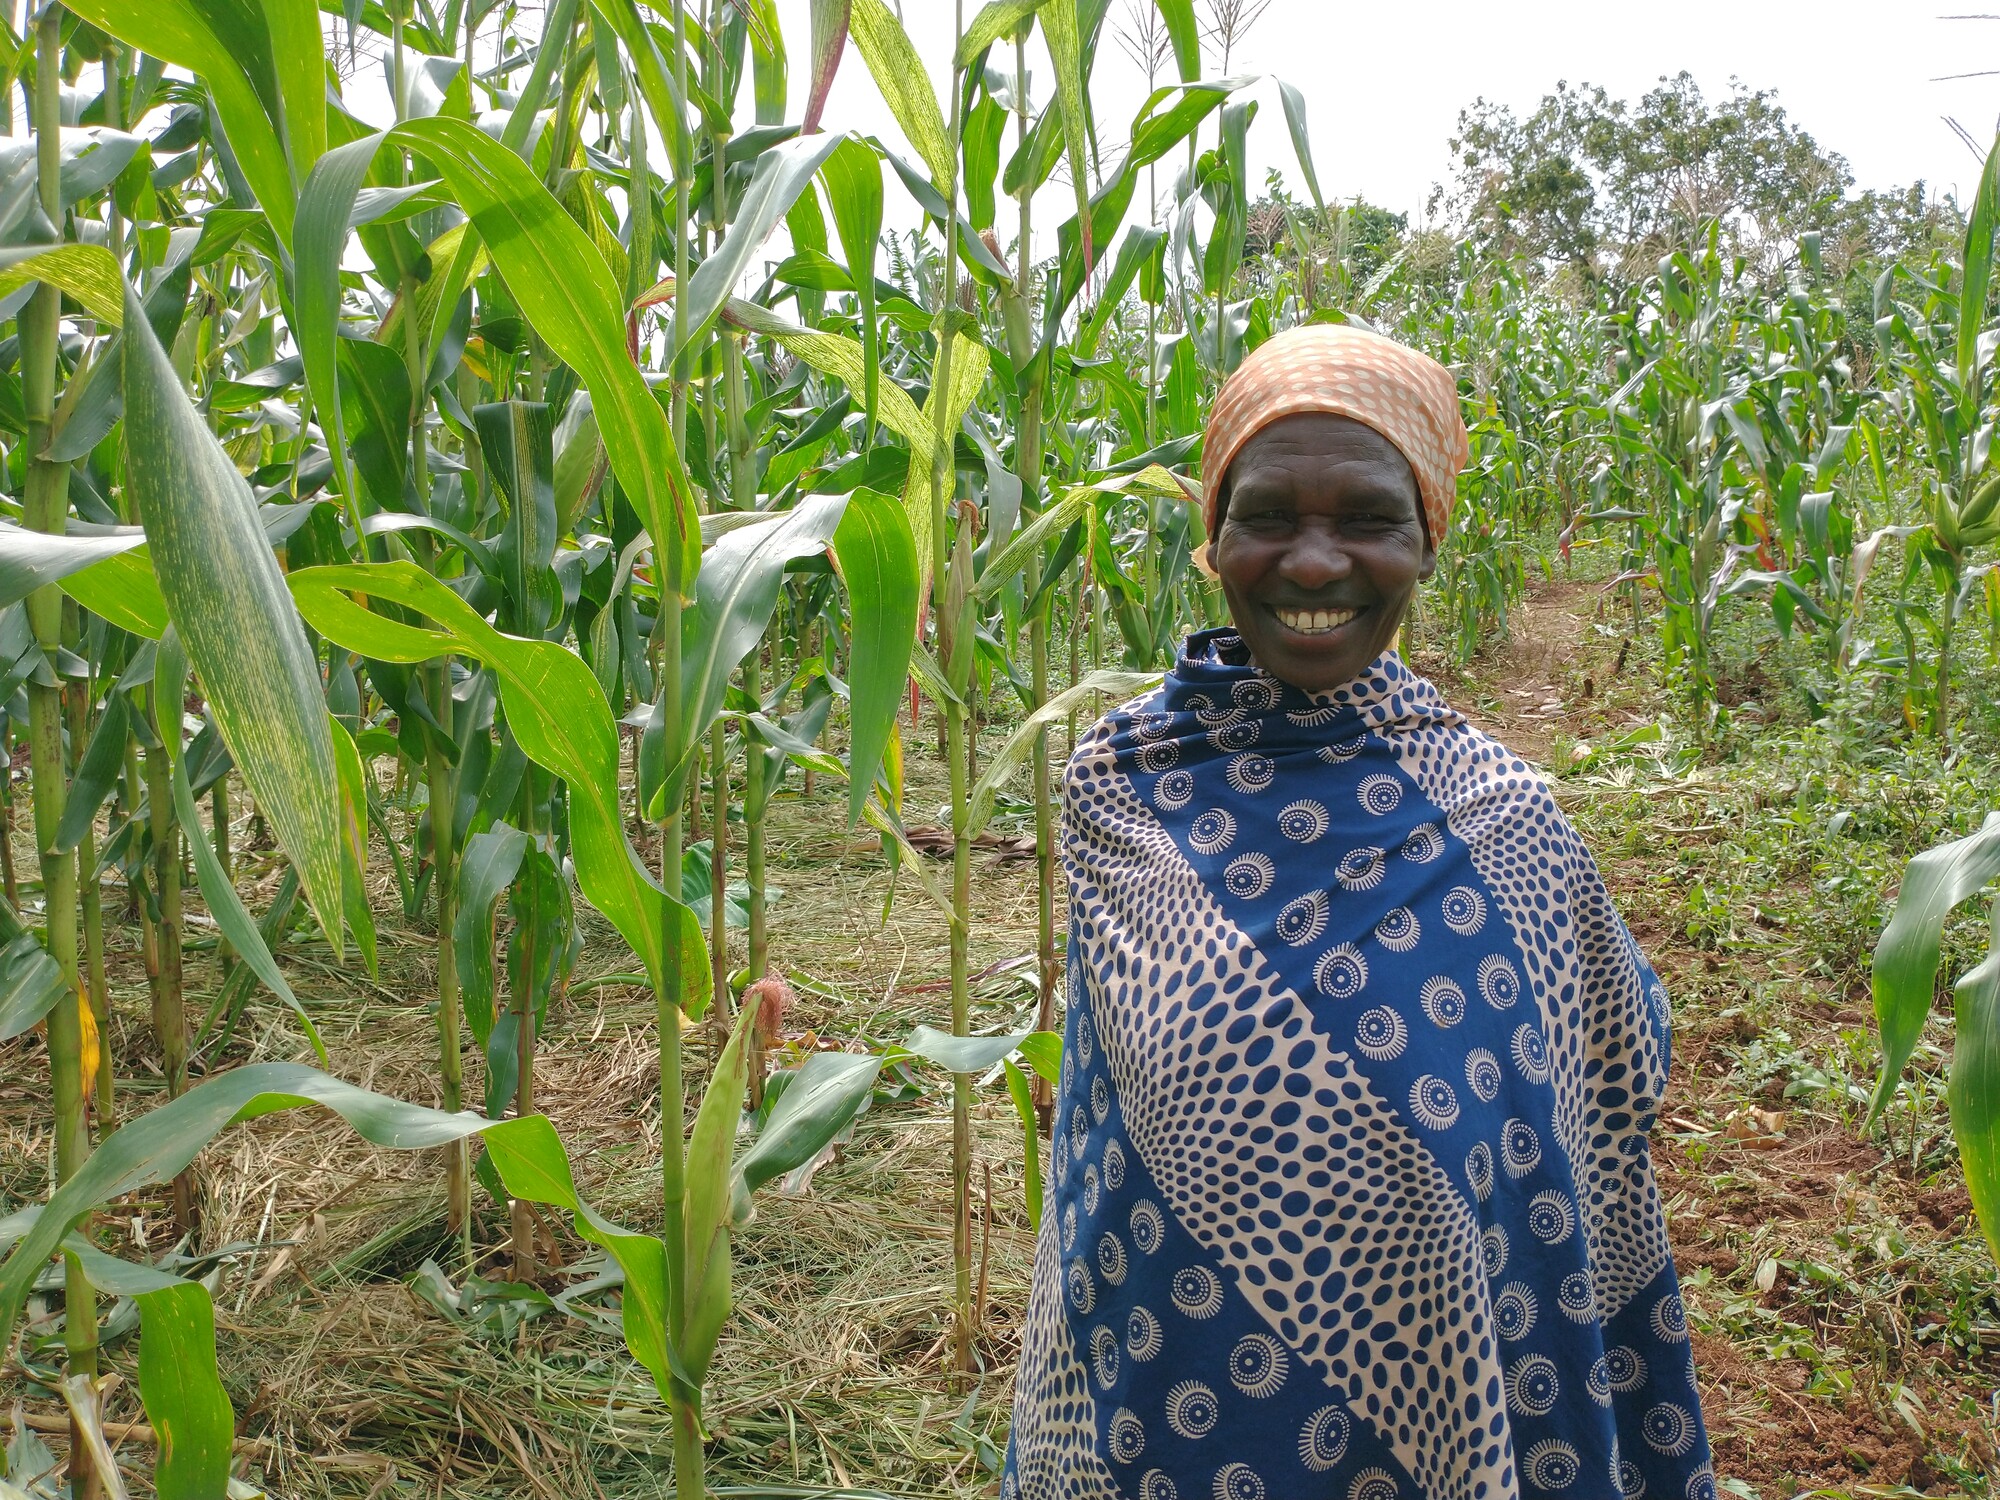 A woman standing in a cornfield smiling